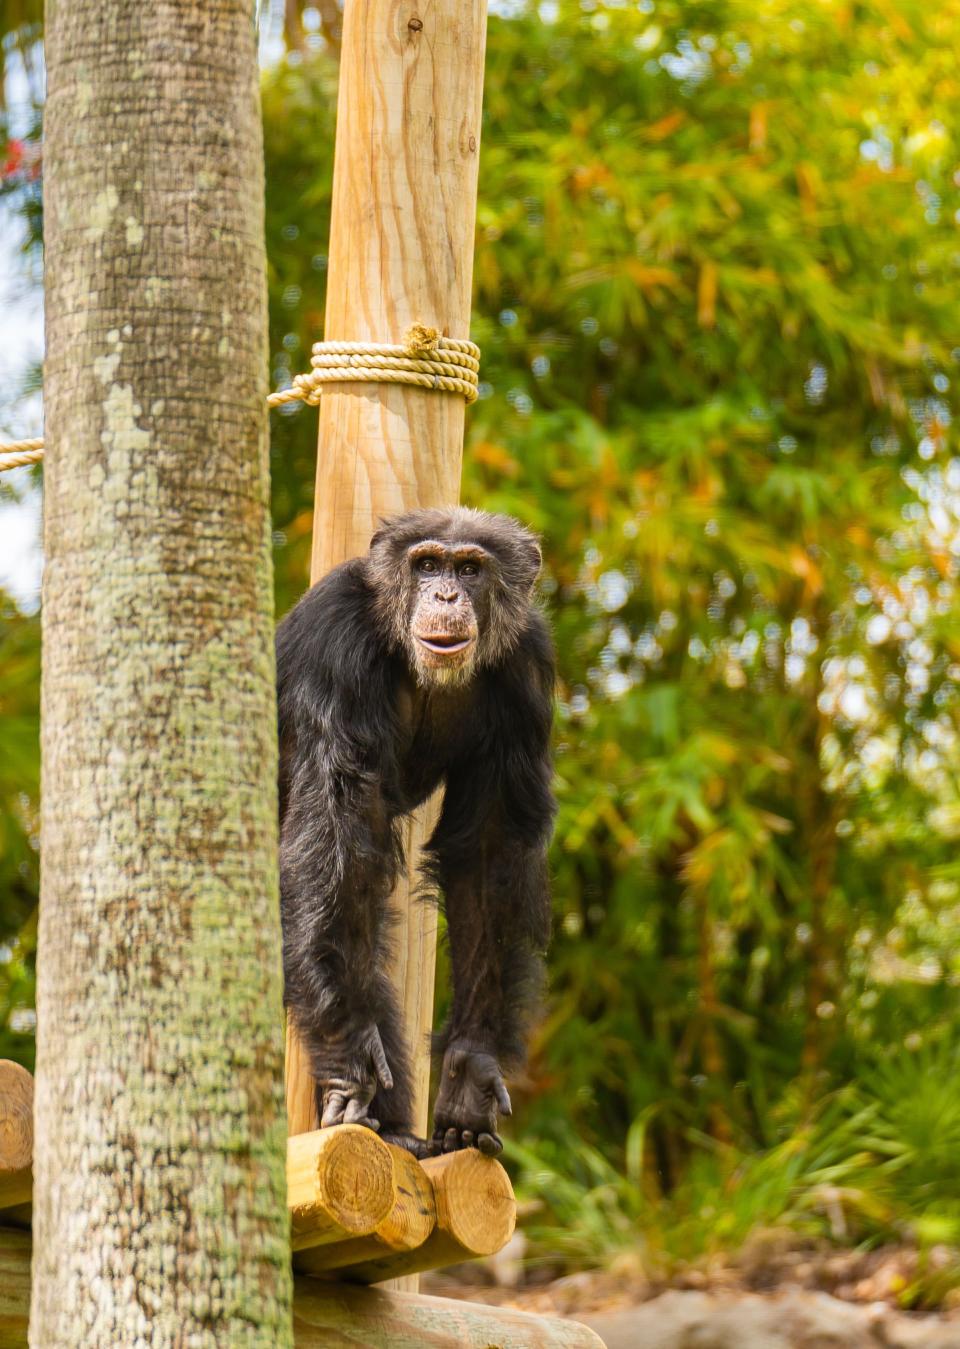 This will add to the troop of two chimpanzees, making it the largest in Central Florida.